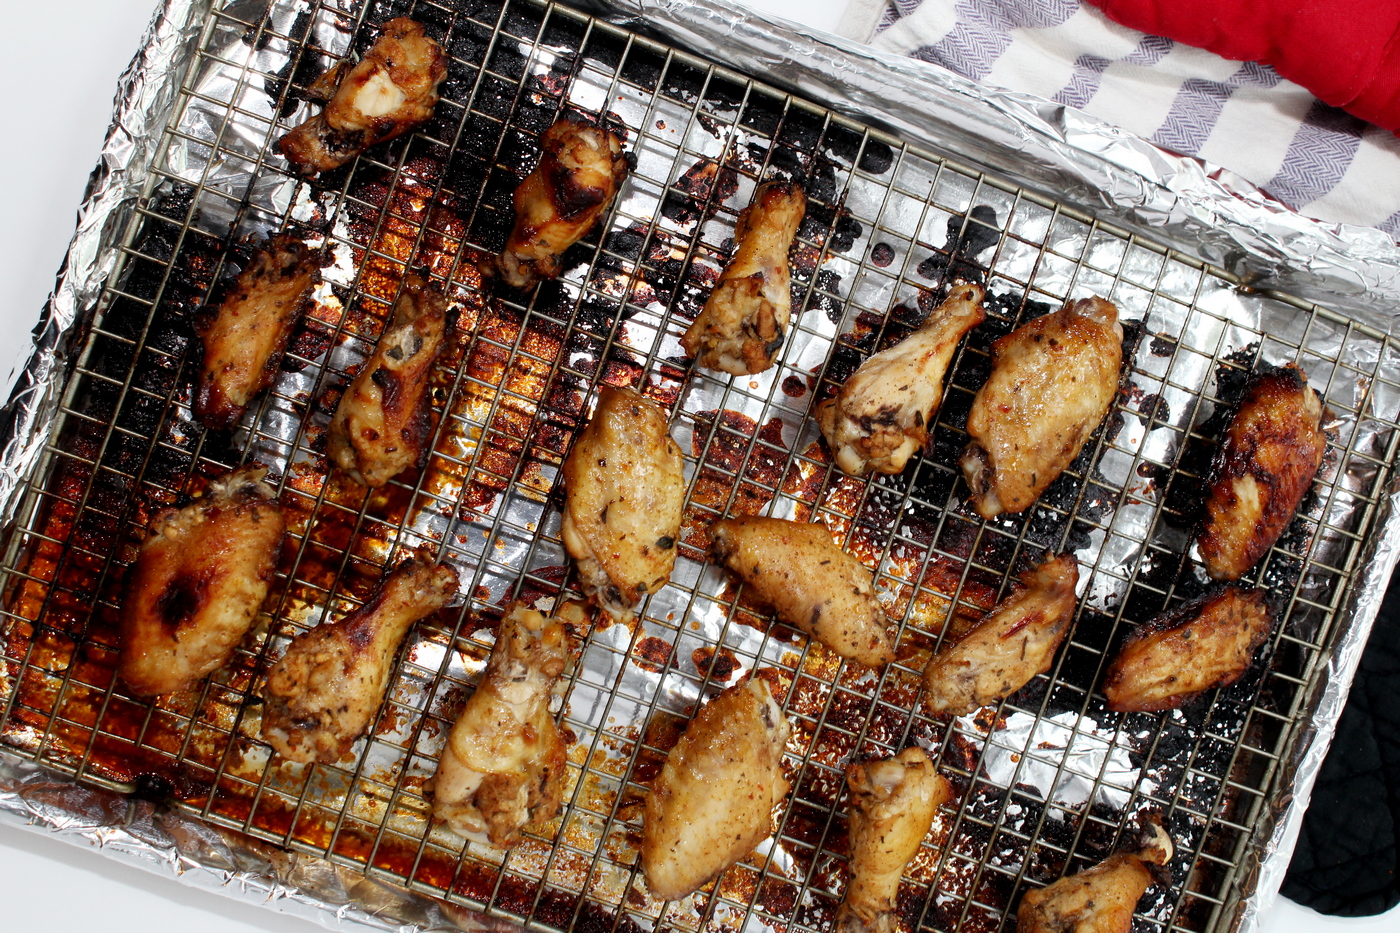 Chicken wings on a baking sheet with towel